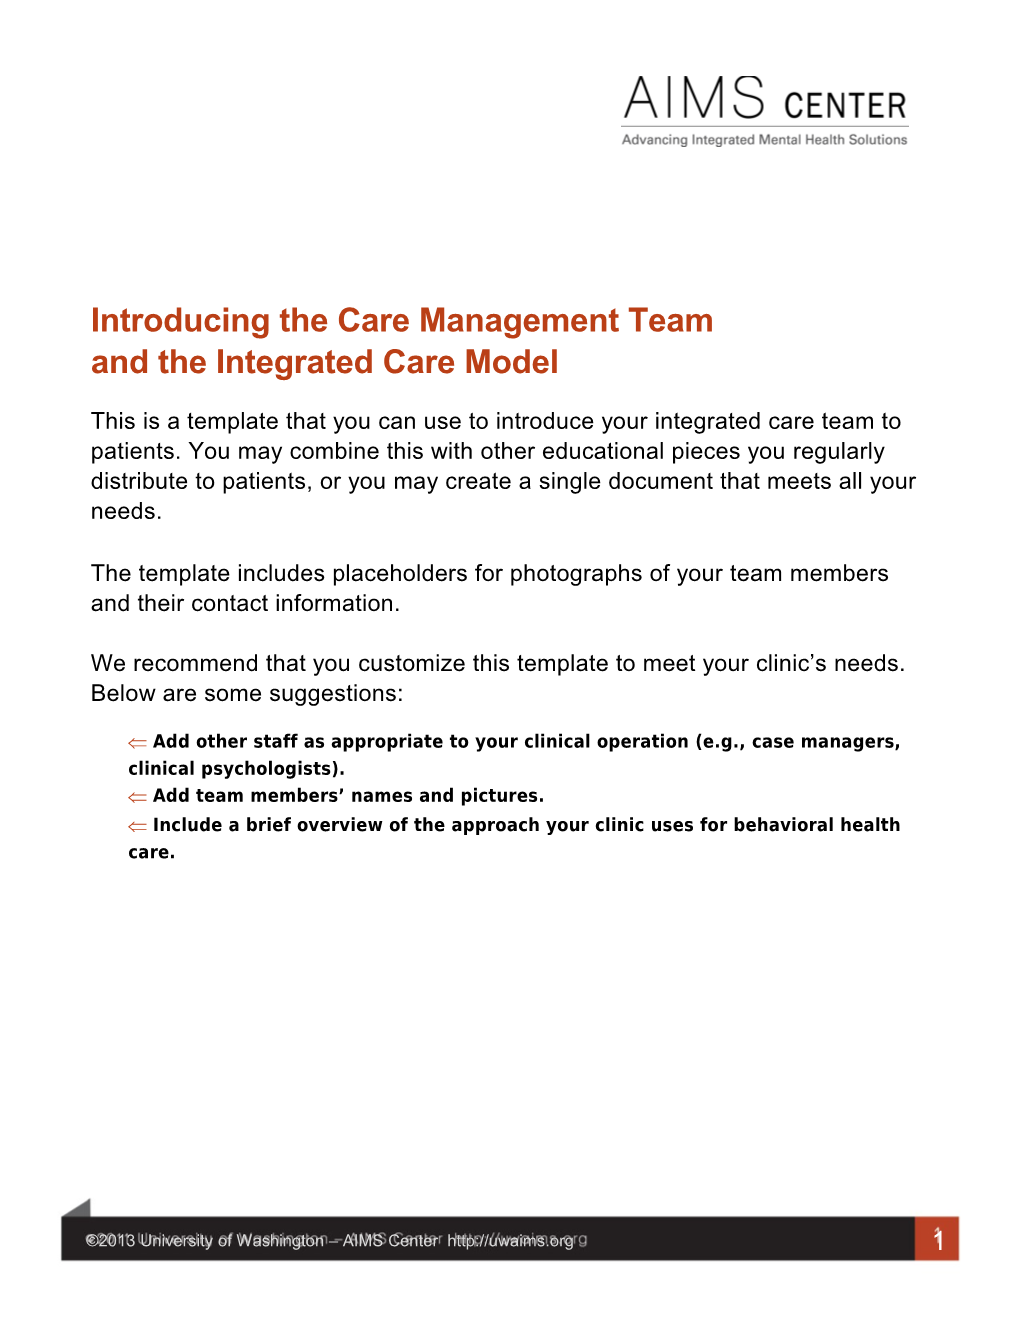 Introducing the Care Management Team